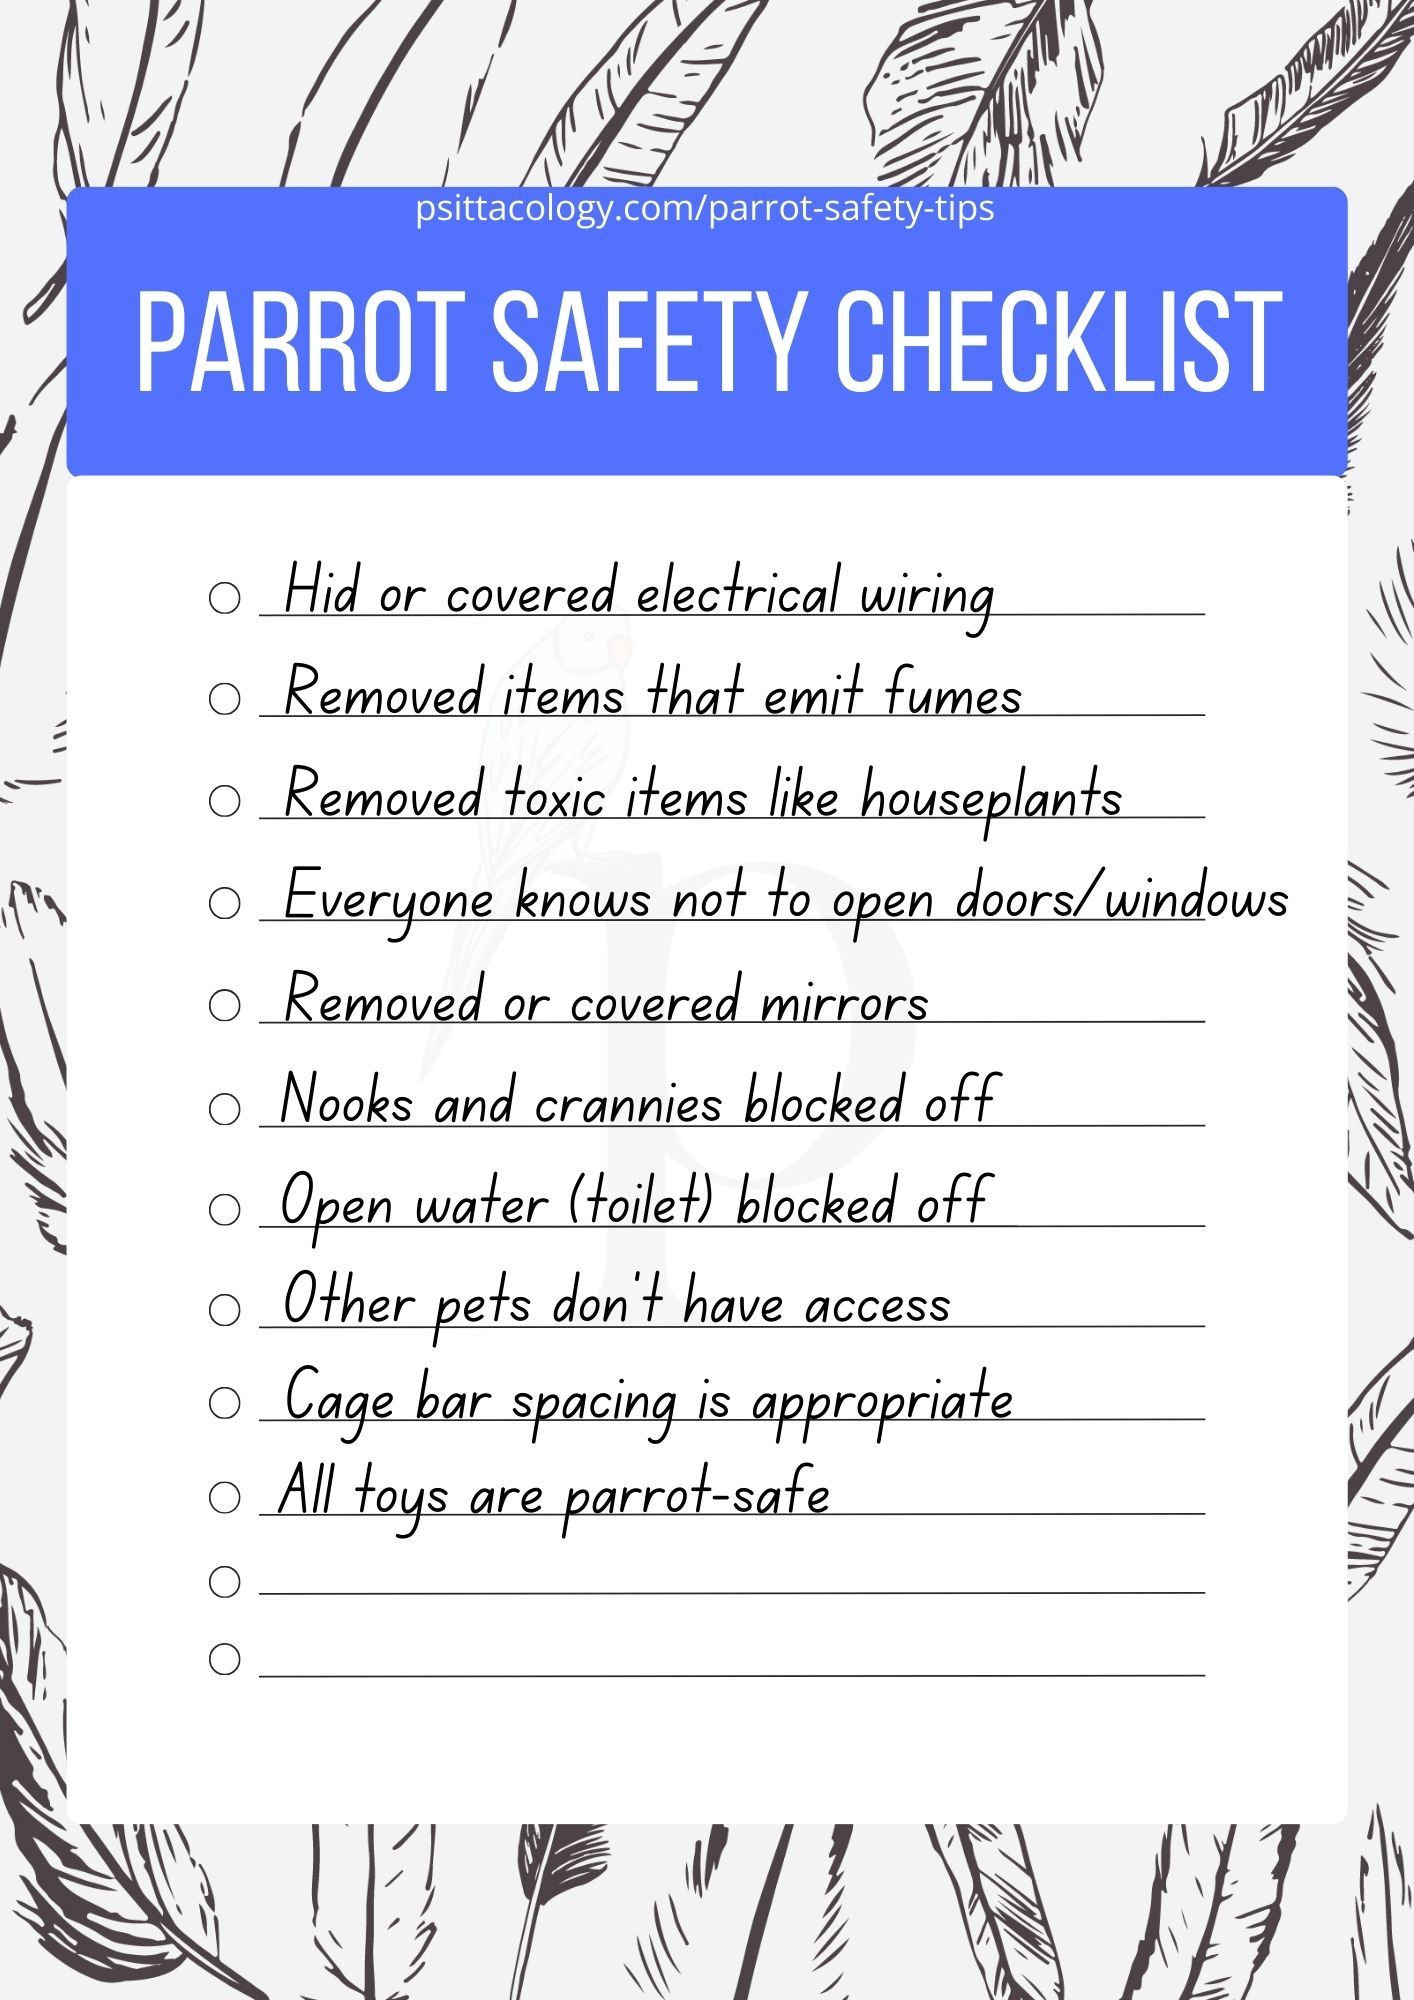 Parrot safety checklist with bird safety tips for new parrot owners to tick off. 